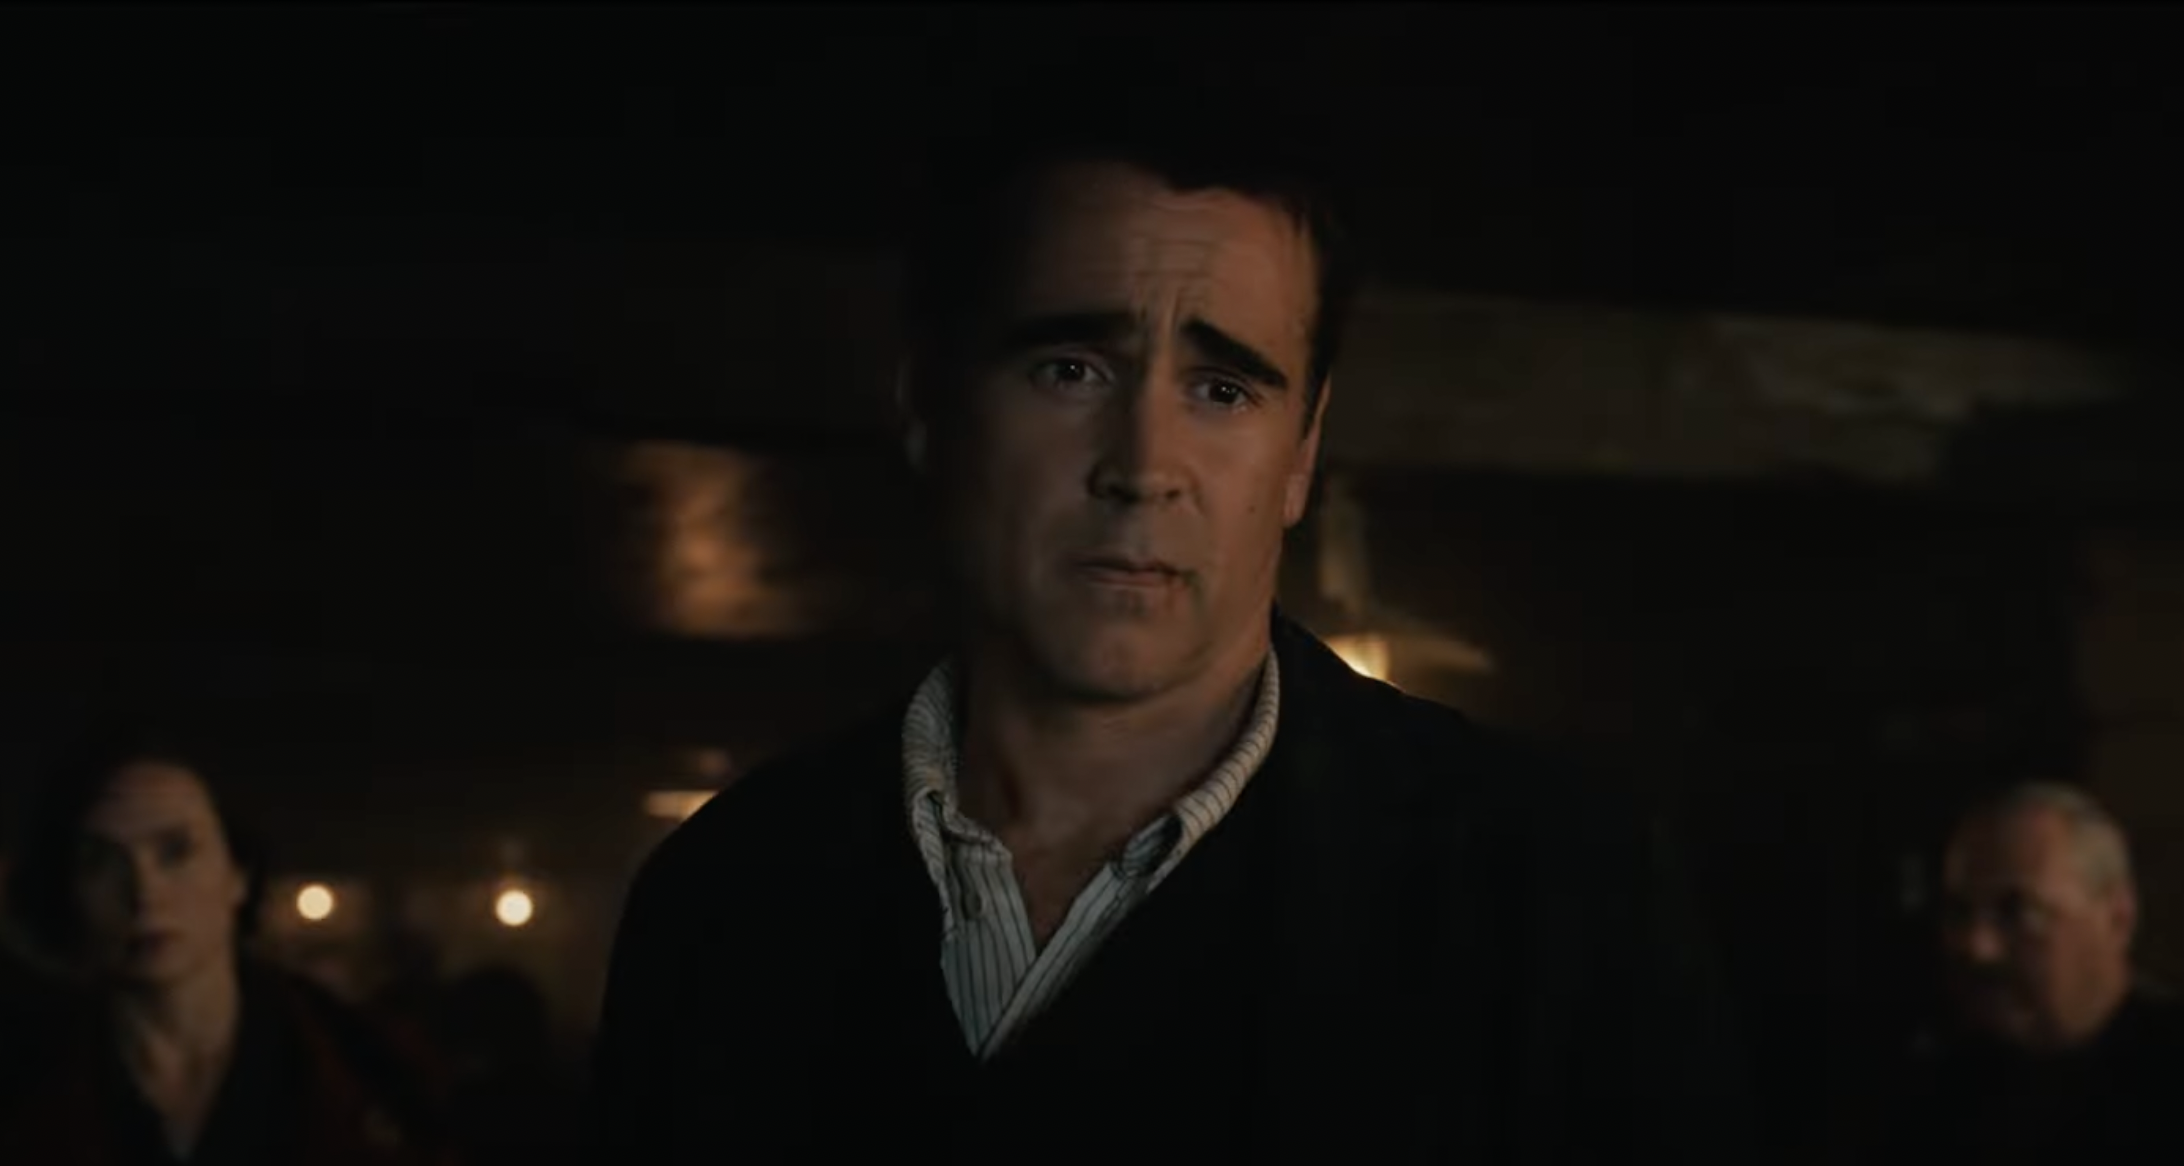 Colin Farrell and Barry Keoghan Shine In First Trailer For Searchlight’s ‘The Banshees of Inisherin’